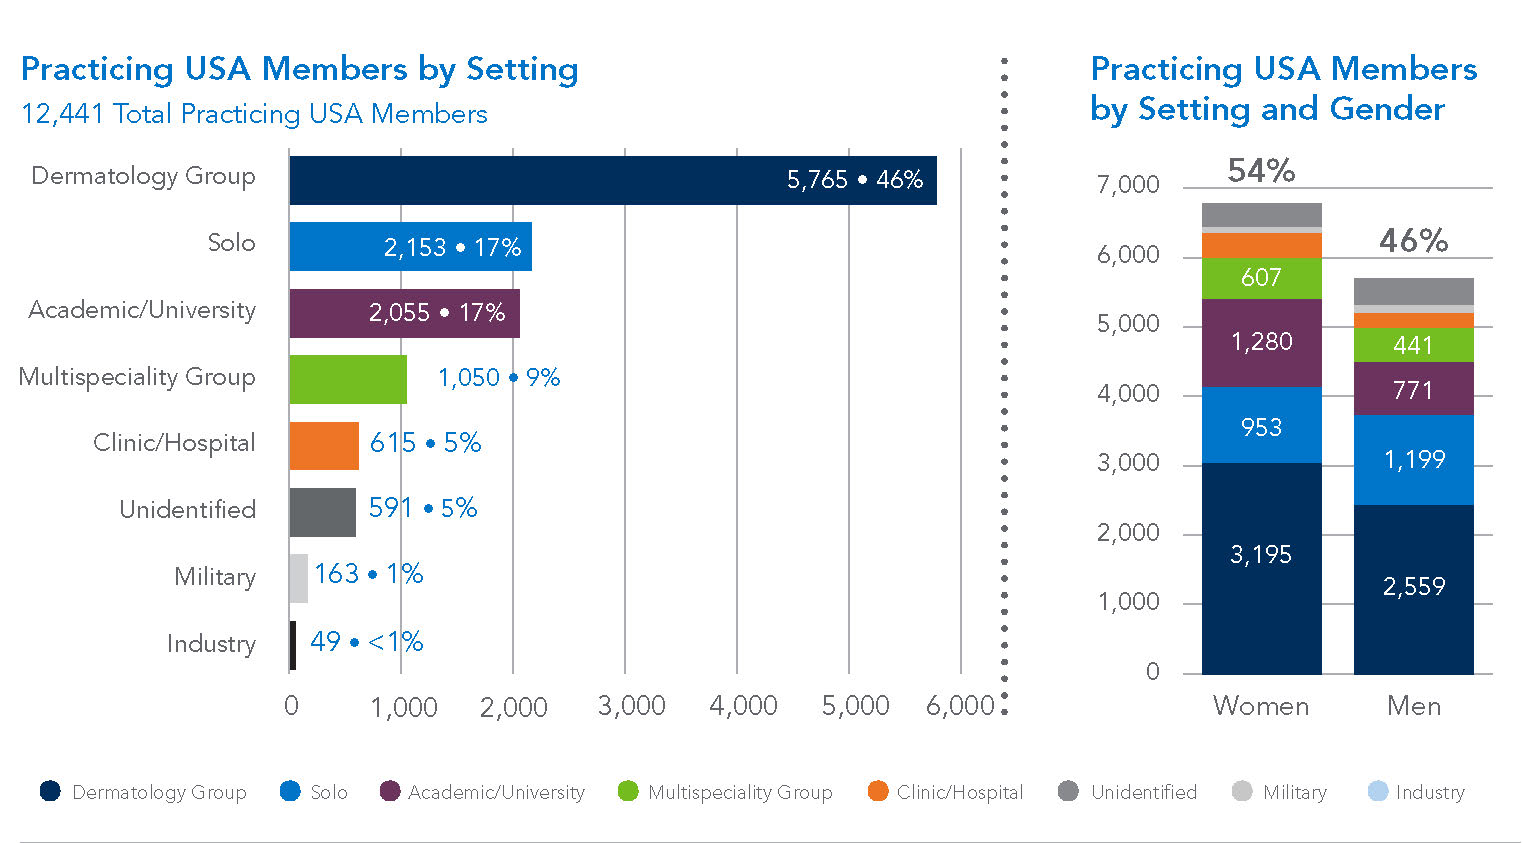 AAD members by practice setting and gender